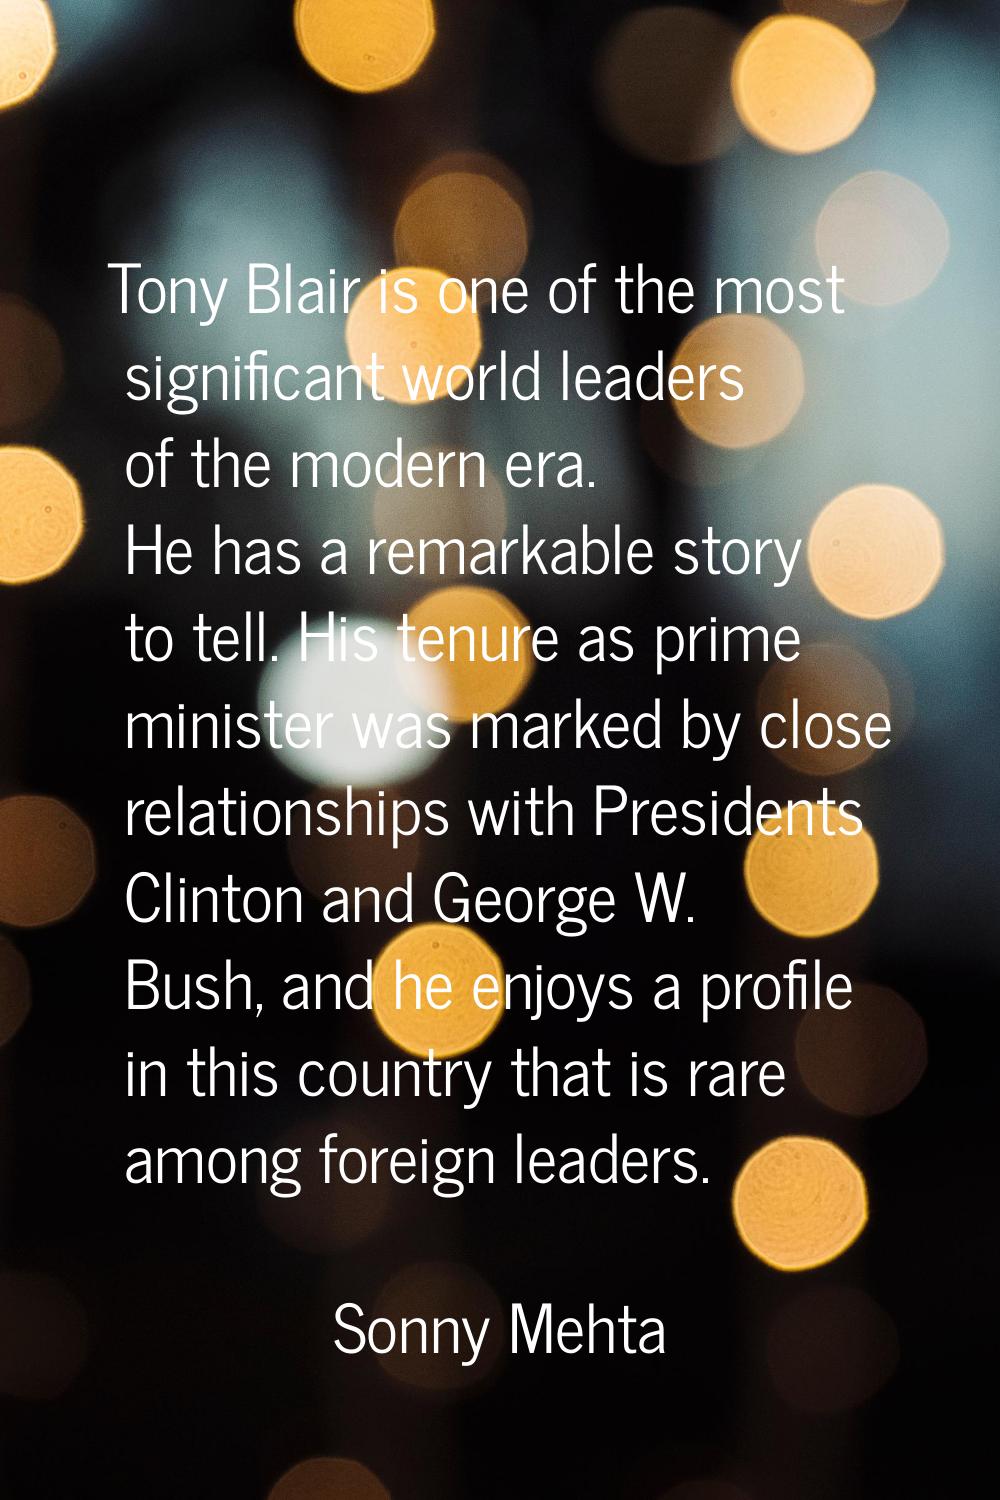 Tony Blair is one of the most significant world leaders of the modern era. He has a remarkable stor